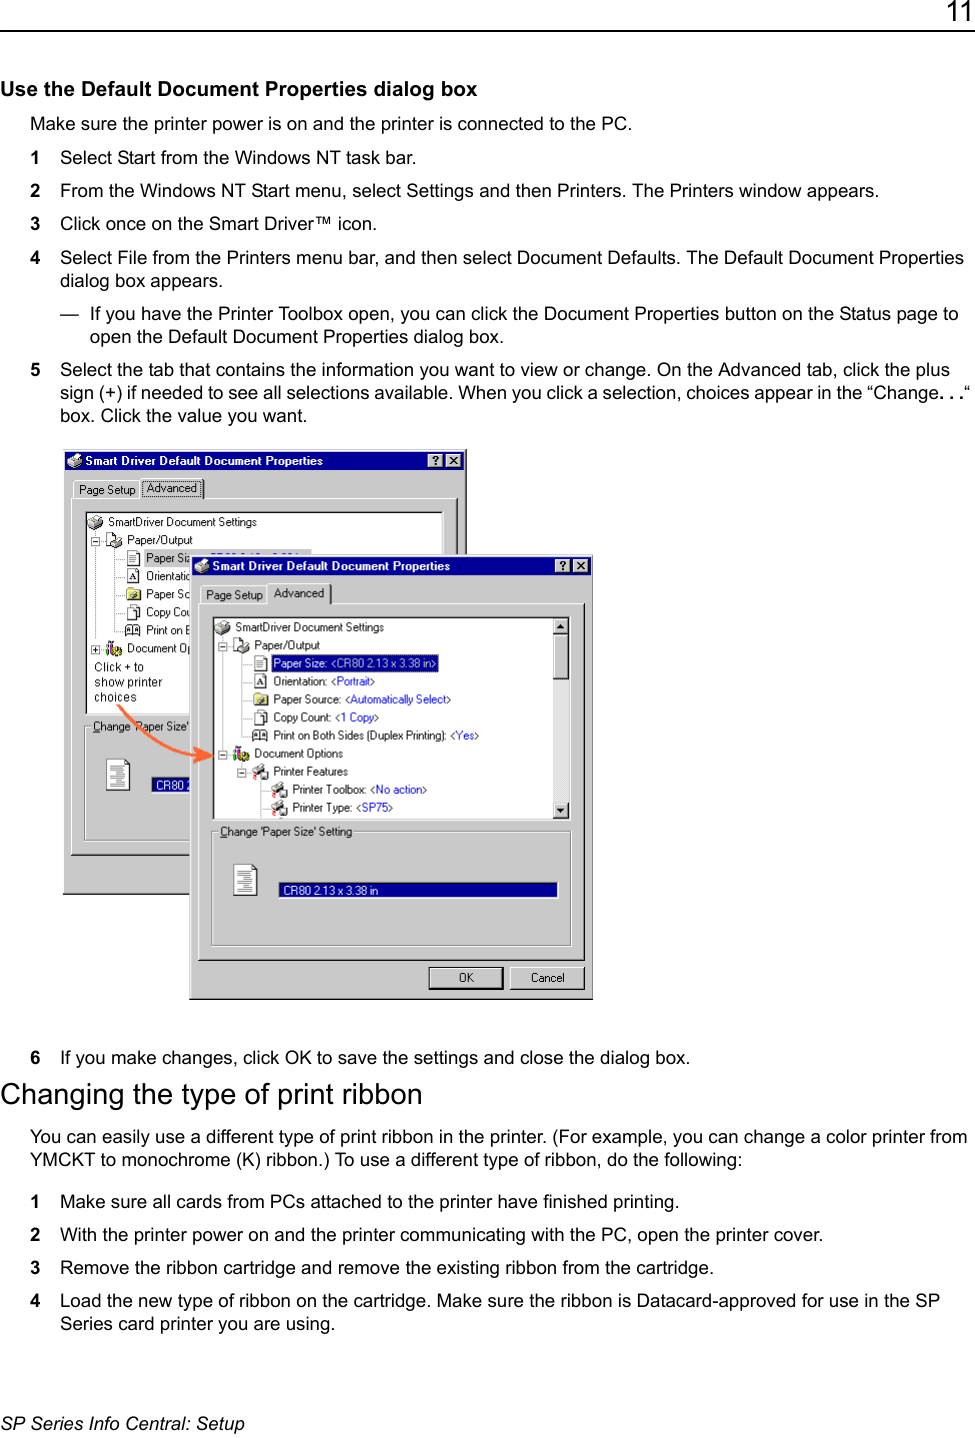 11SP Series Info Central: SetupUse the Default Document Properties dialog boxMake sure the printer power is on and the printer is connected to the PC.1Select Start from the Windows NT task bar.2From the Windows NT Start menu, select Settings and then Printers. The Printers window appears.3Click once on the Smart Driver™ icon.4Select File from the Printers menu bar, and then select Document Defaults. The Default Document Properties dialog box appears.—  If you have the Printer Toolbox open, you can click the Document Properties button on the Status page to open the Default Document Properties dialog box.5Select the tab that contains the information you want to view or change. On the Advanced tab, click the plus sign (+) if needed to see all selections available. When you click a selection, choices appear in the “Change. . .“ box. Click the value you want.6If you make changes, click OK to save the settings and close the dialog box.Changing the type of print ribbonYou can easily use a different type of print ribbon in the printer. (For example, you can change a color printer from YMCKT to monochrome (K) ribbon.) To use a different type of ribbon, do the following:1Make sure all cards from PCs attached to the printer have finished printing.2With the printer power on and the printer communicating with the PC, open the printer cover.3Remove the ribbon cartridge and remove the existing ribbon from the cartridge.4Load the new type of ribbon on the cartridge. Make sure the ribbon is Datacard-approved for use in the SP Series card printer you are using.